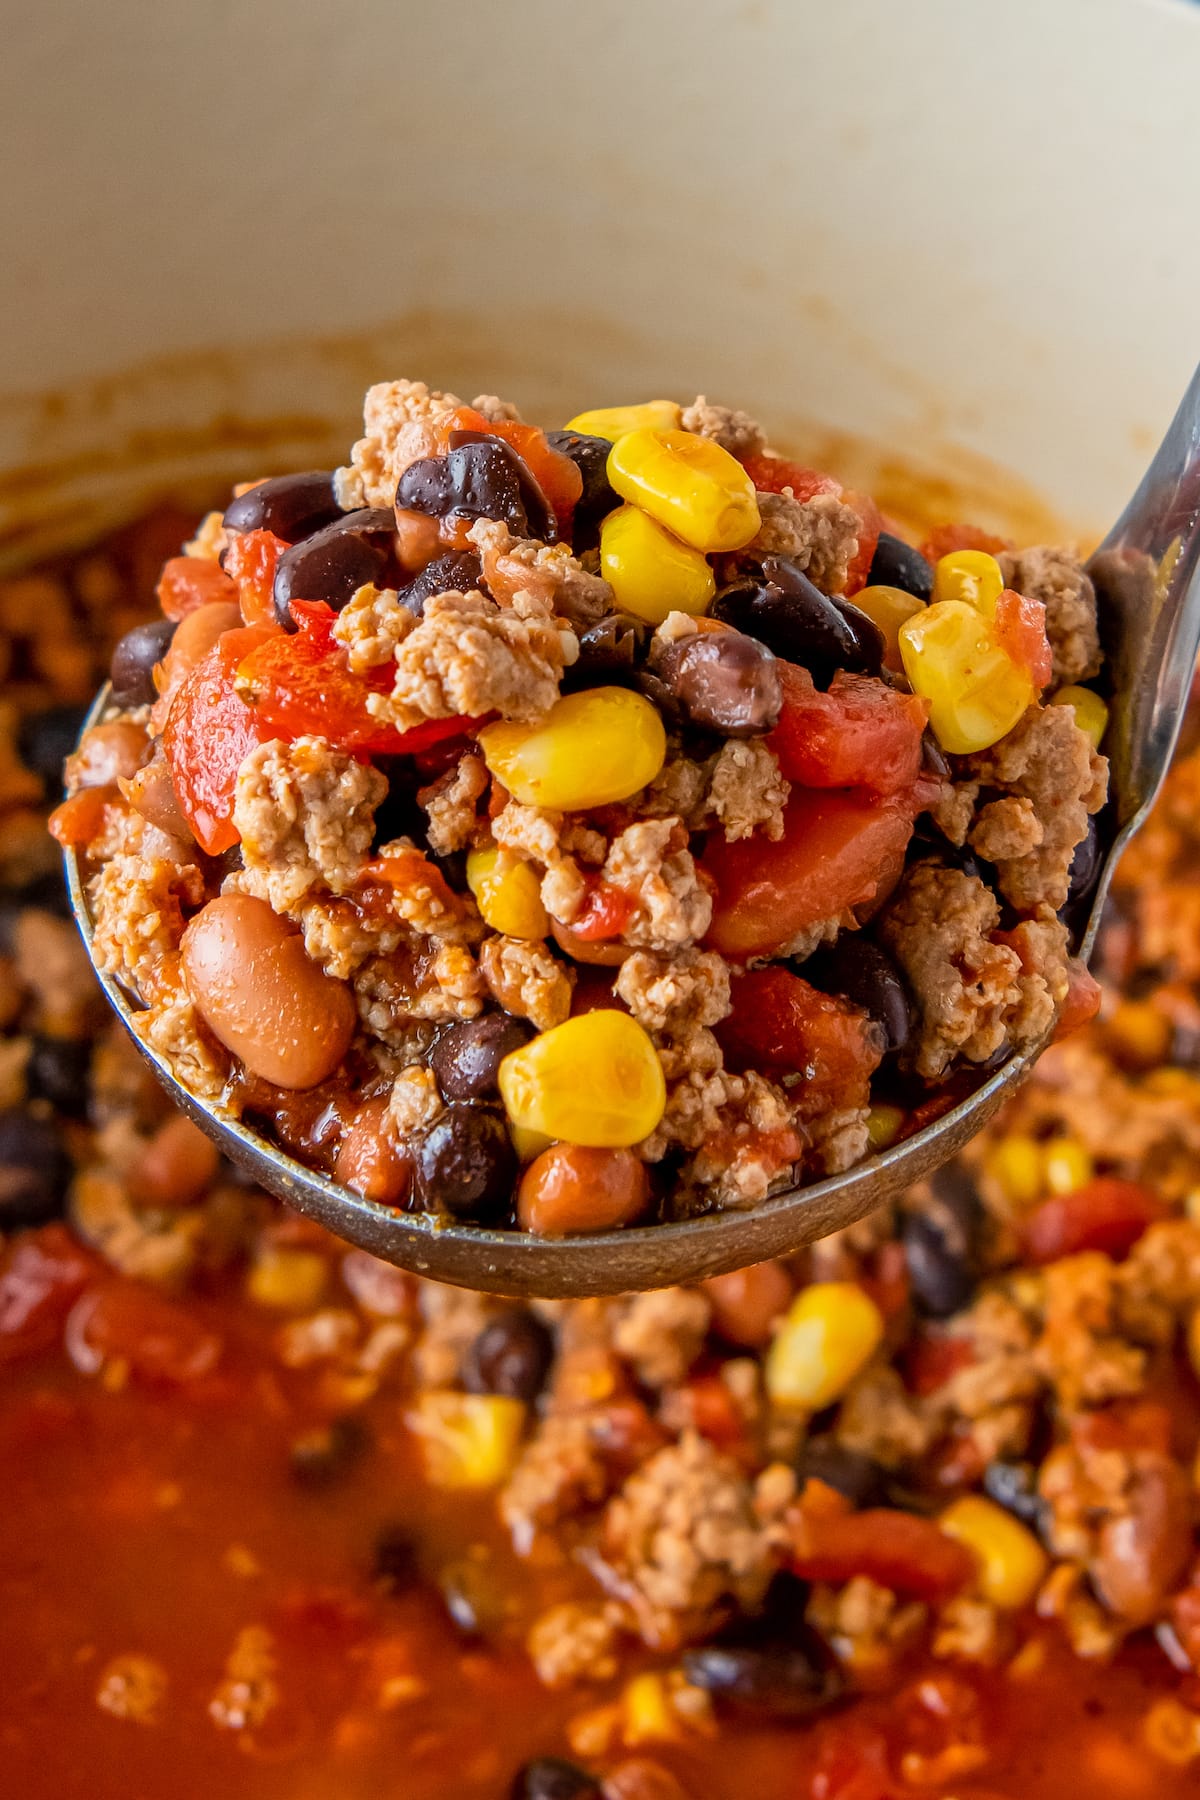 a ladle of taco soup including beans, tomatoes, and ground beef in a tomato broth